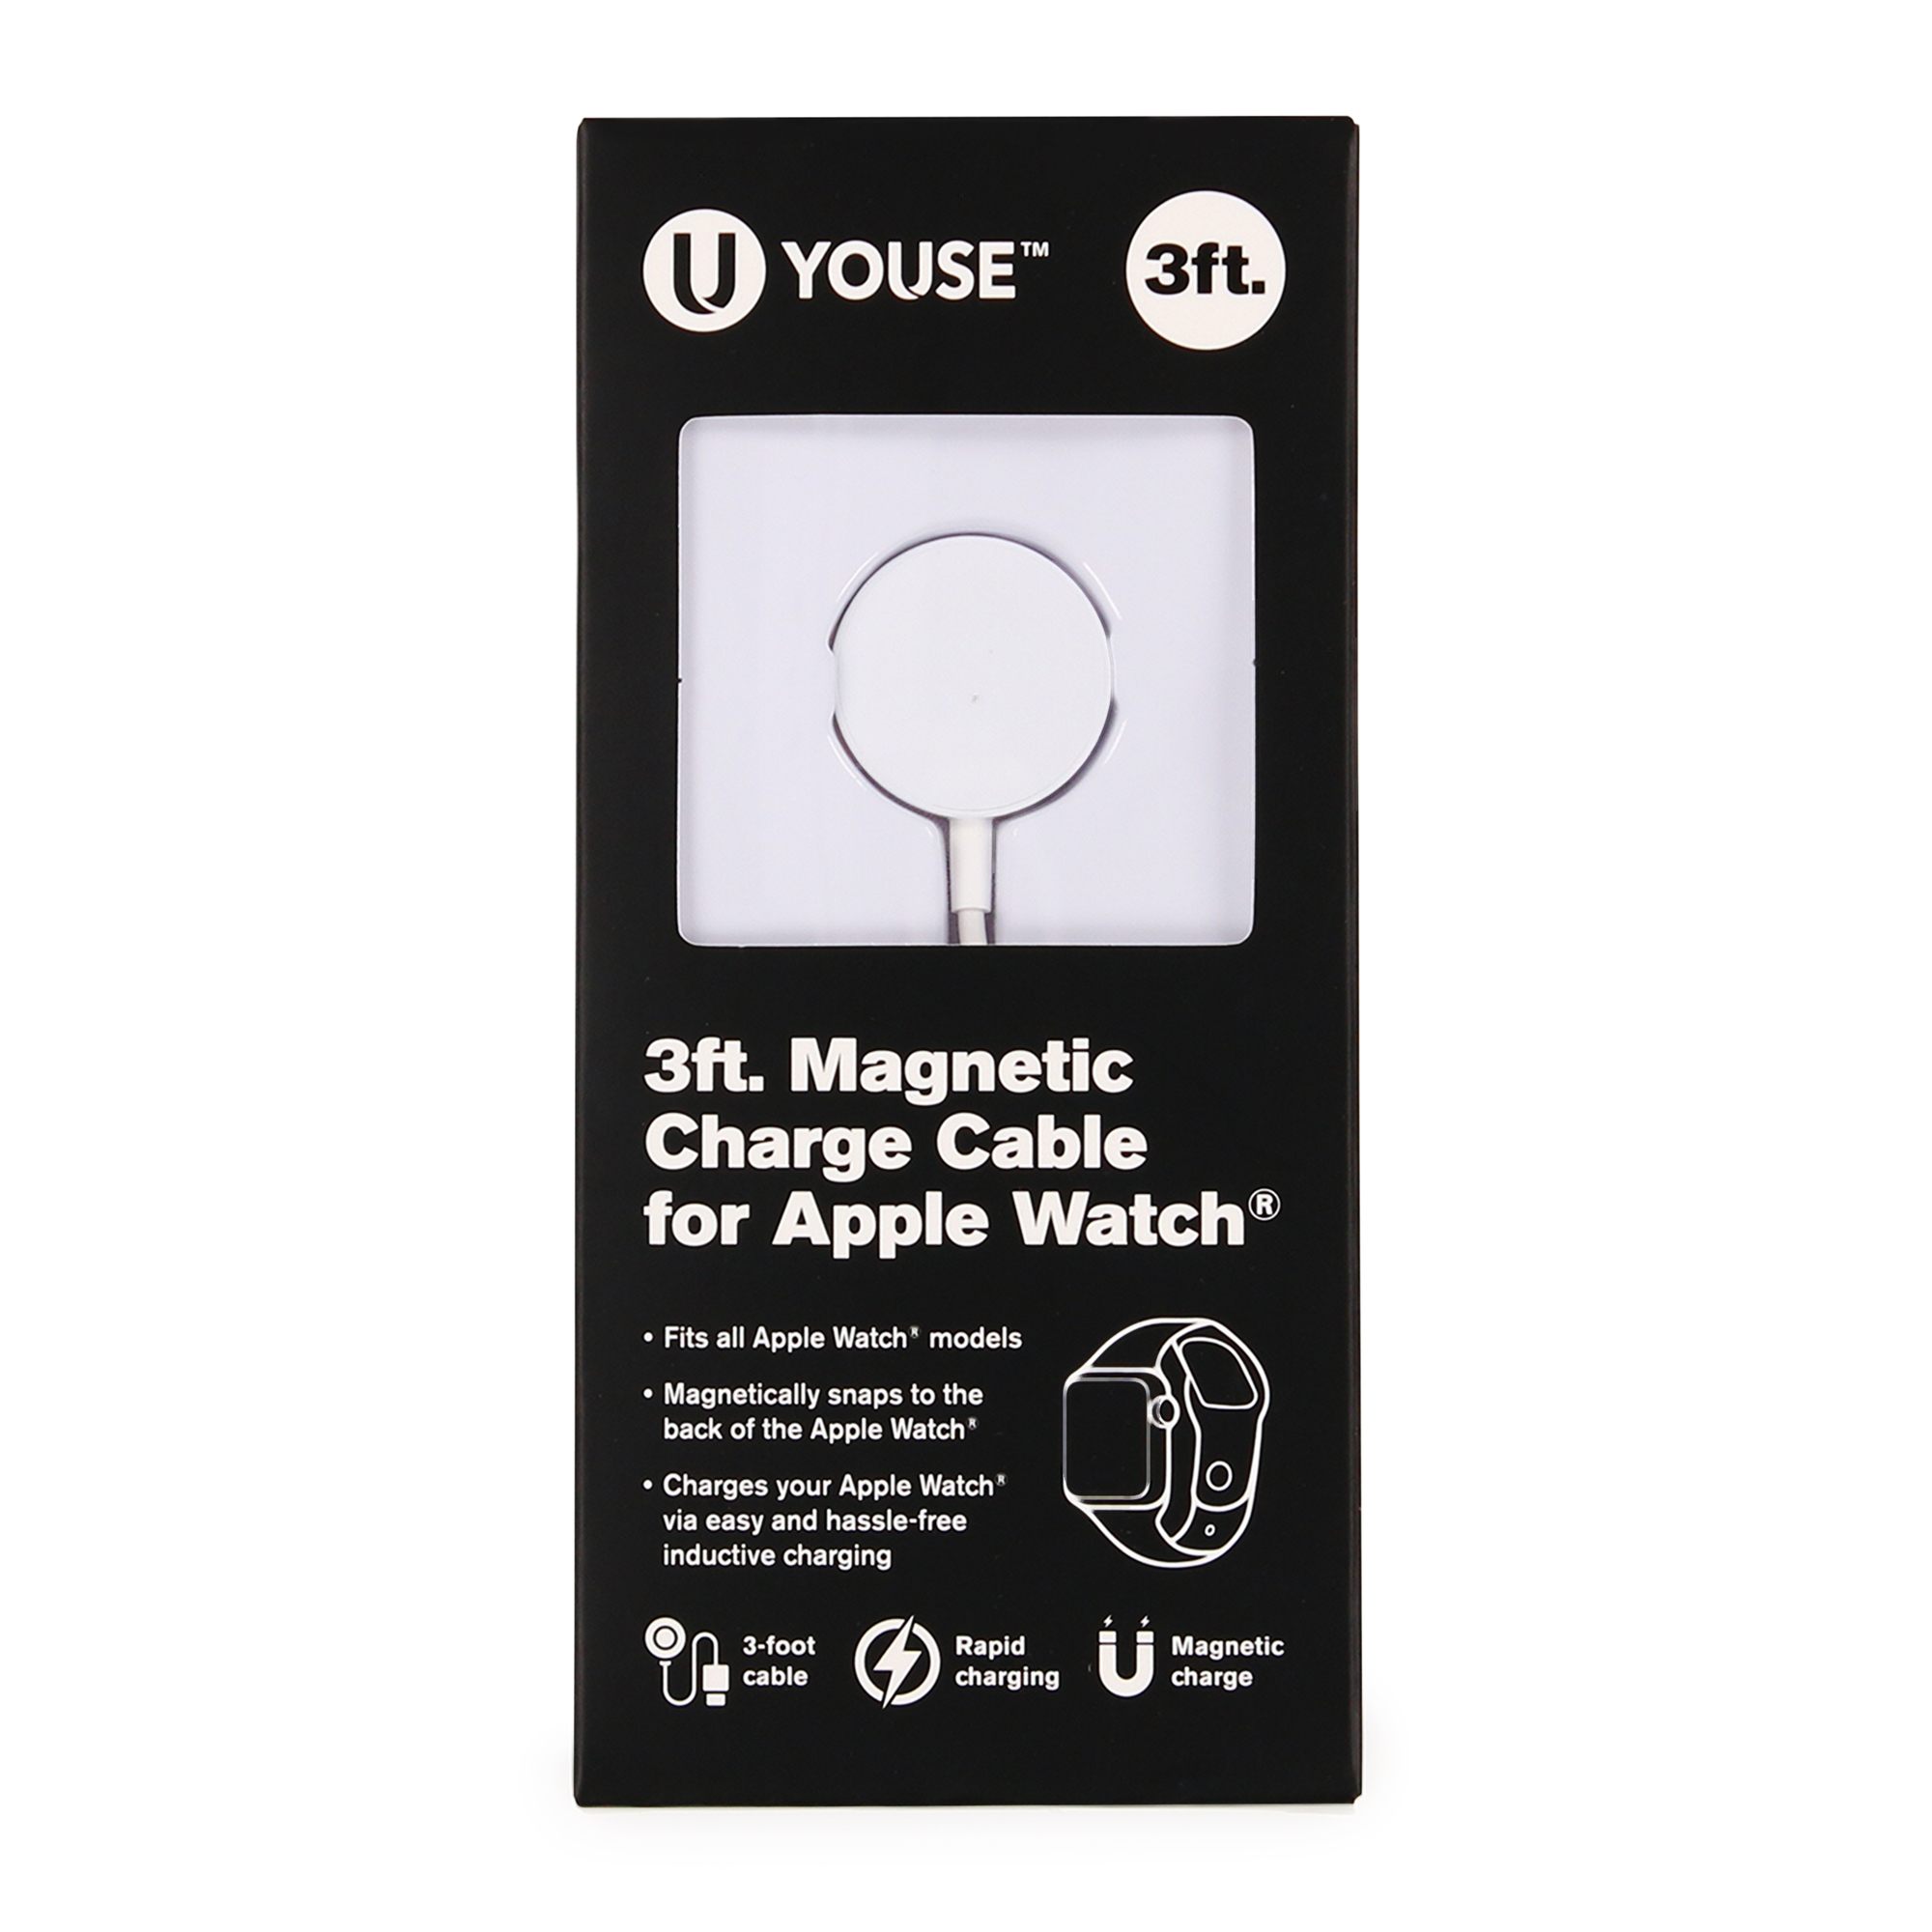 3ft magnetic charging cable for Apple Watch®